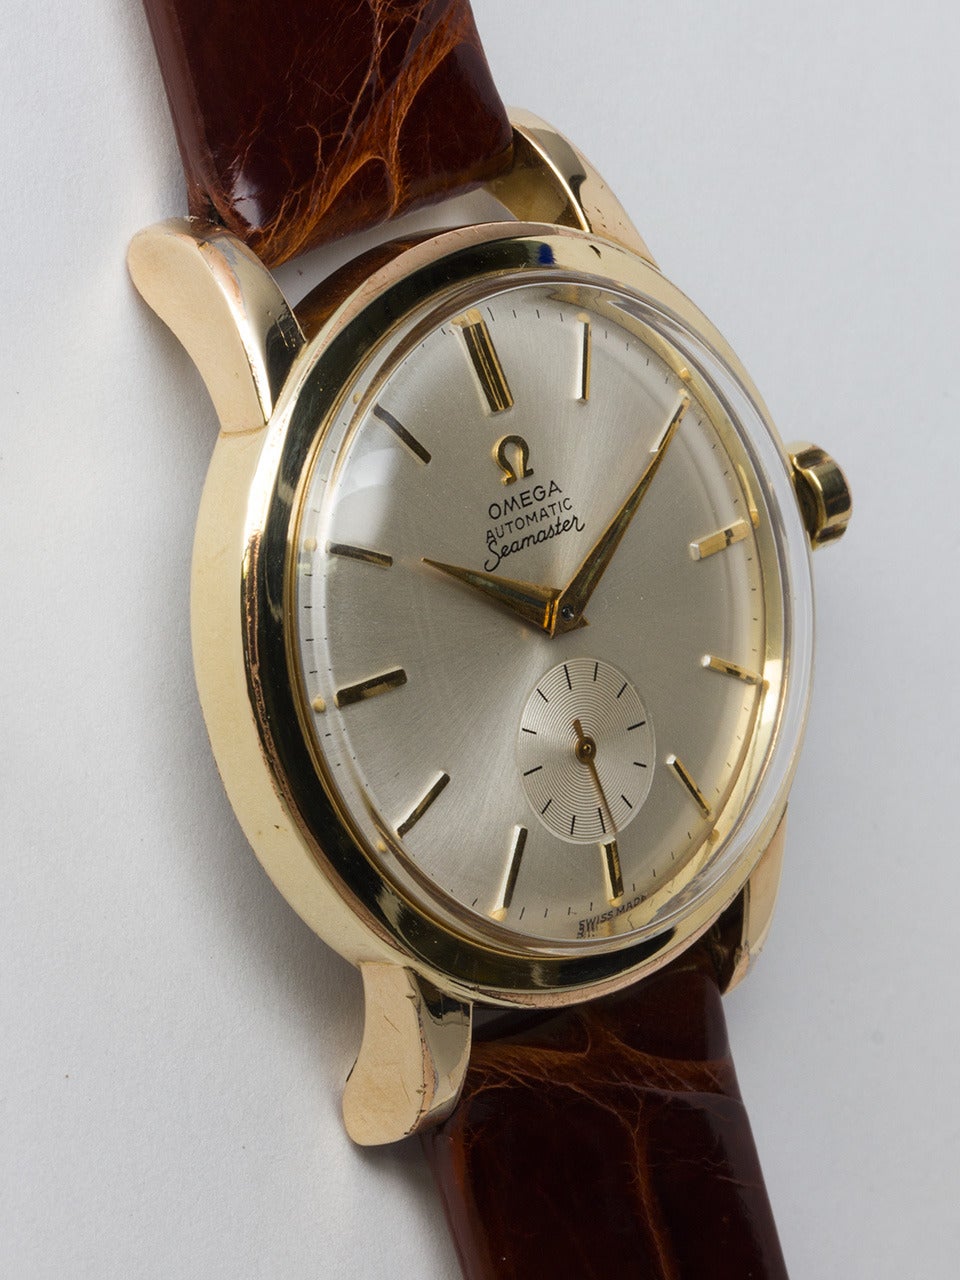 Omega Yellow Gold Filled Seamaster Wristwatch, ref 2493-4 movement serial # 12.2 million circa 1950. Oversized case measuring 35 X 42mm case with screw down stainless steel back, wide bezel and acrylic crystal. Beautiful condition original silvered